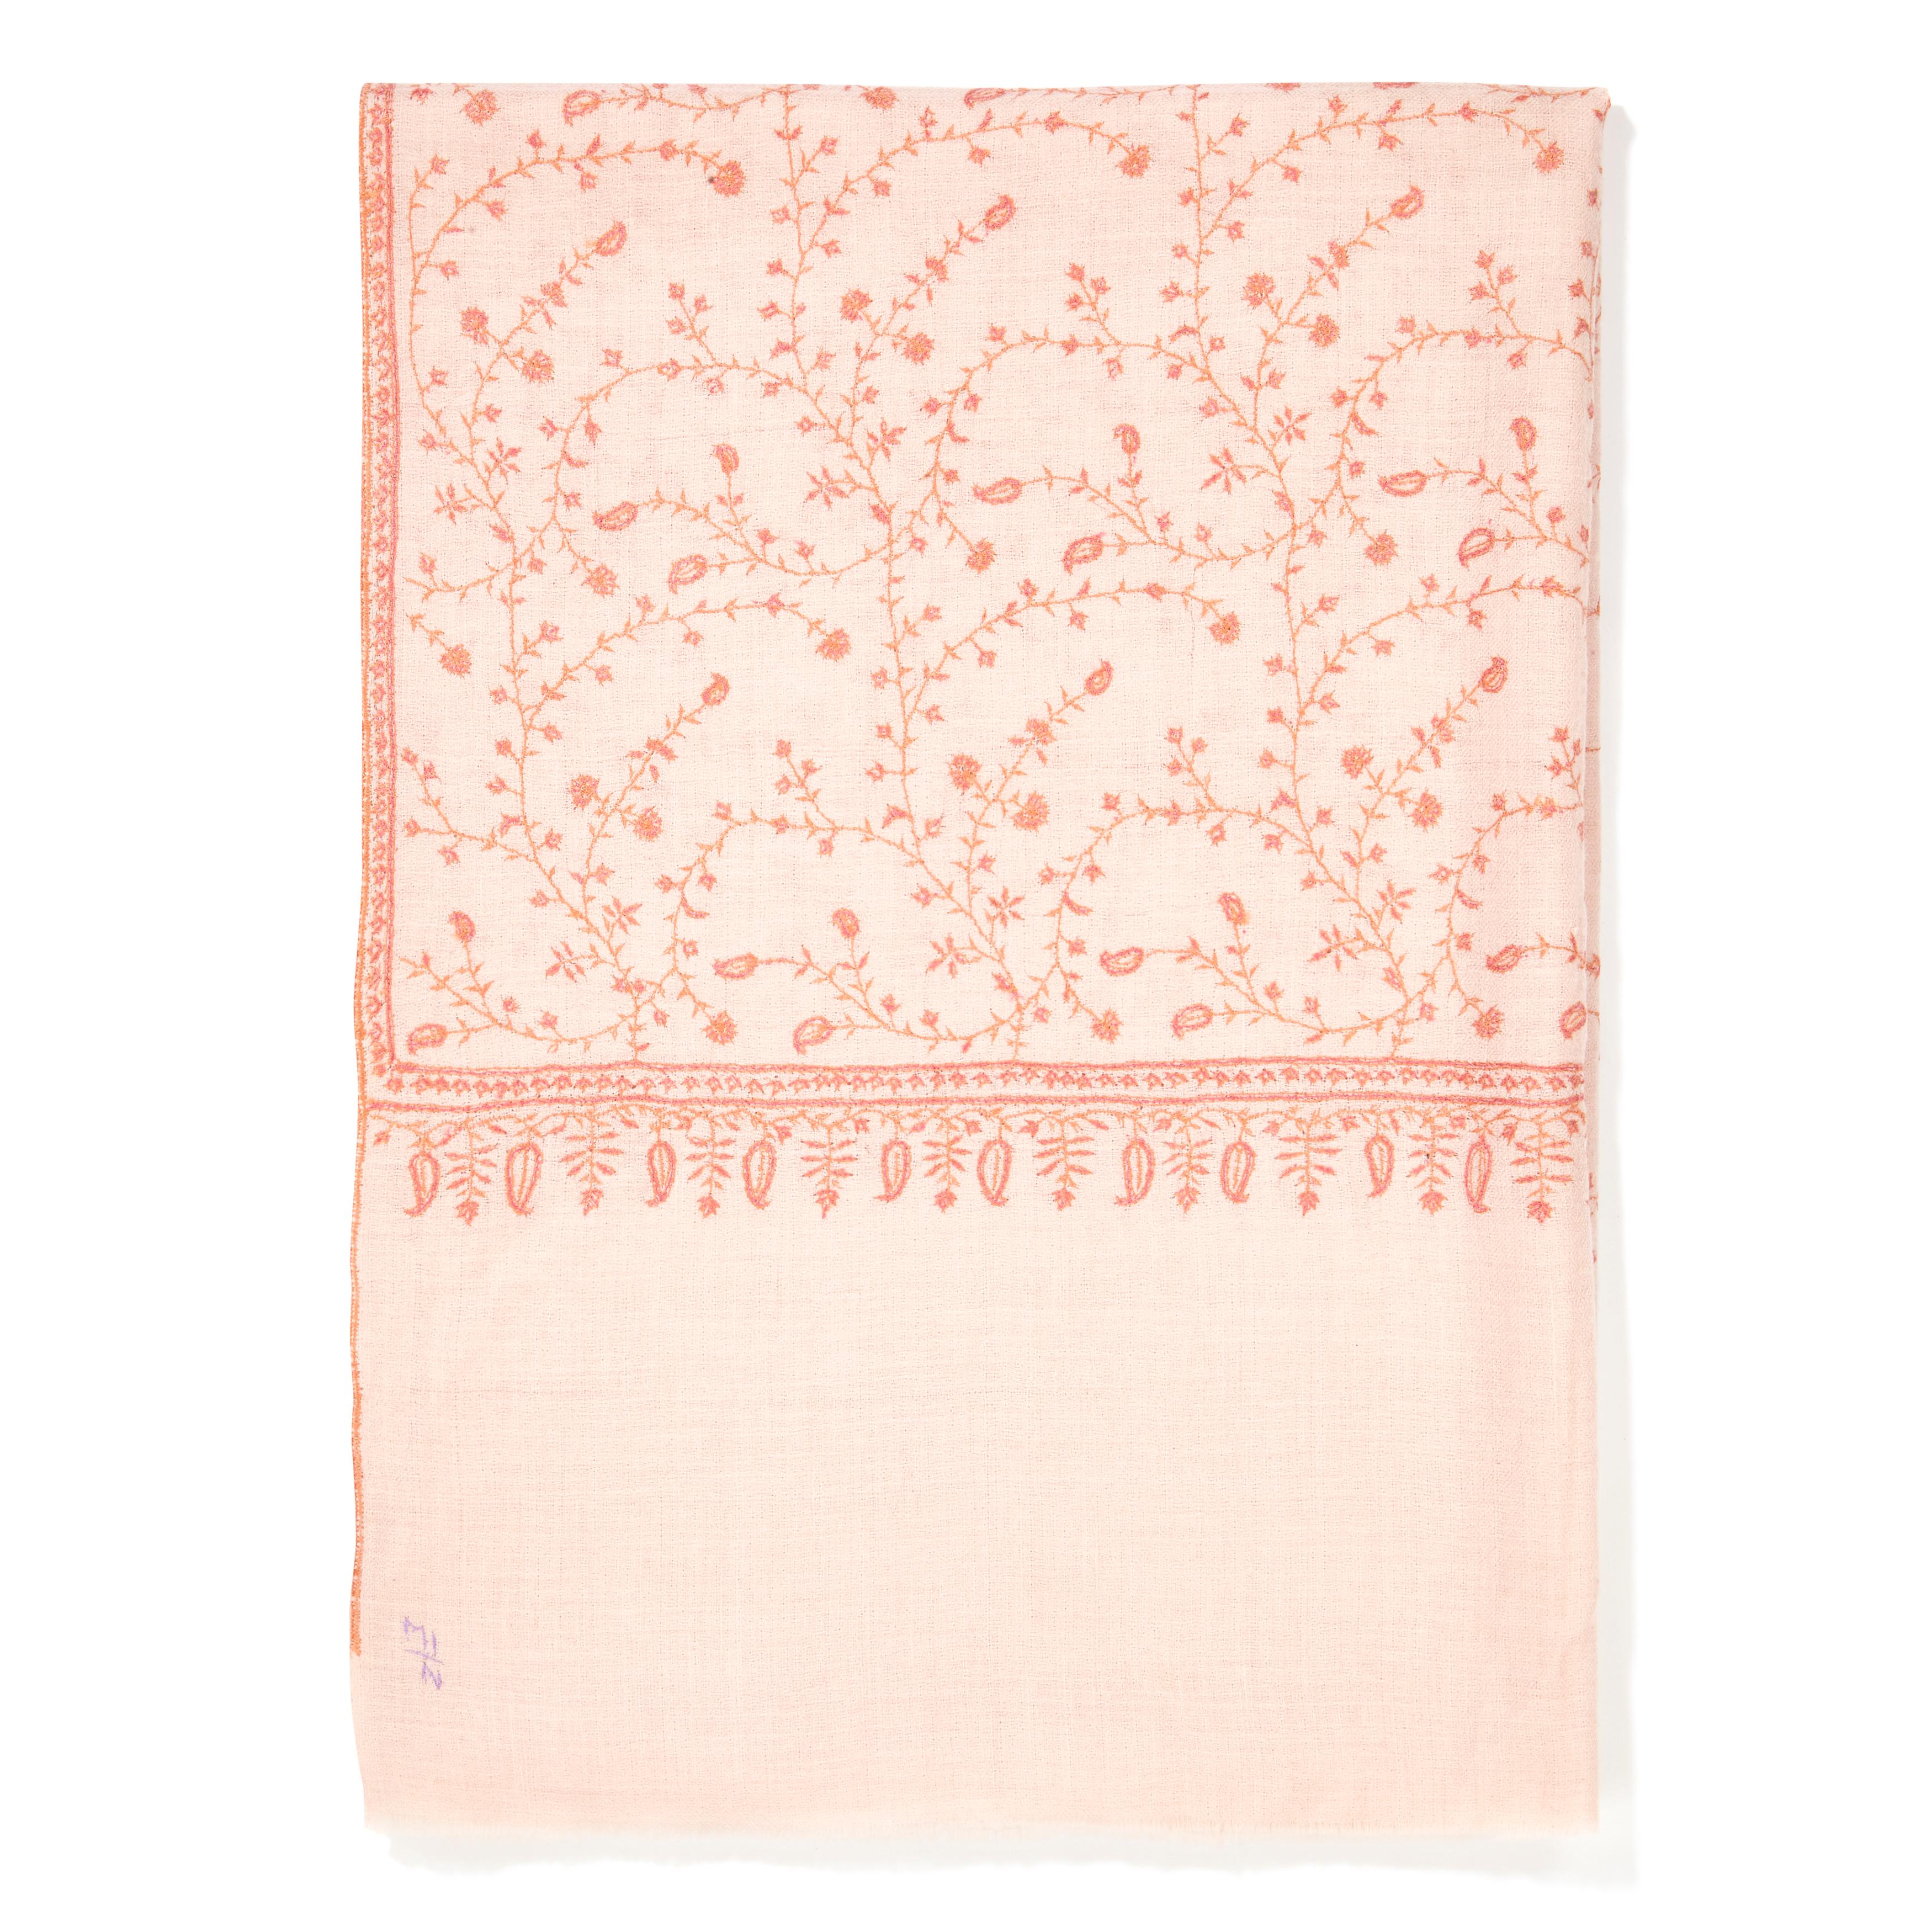 Limited Edition Hand Embroidered Pale Pink 100% Cashmere Shawl - Brand New 

Verheyen London’s shawl is spun from the finest embroidered woven cashmere from Kashmir.  The embroidery can take up to 1 year to embroider these shawls and each one is